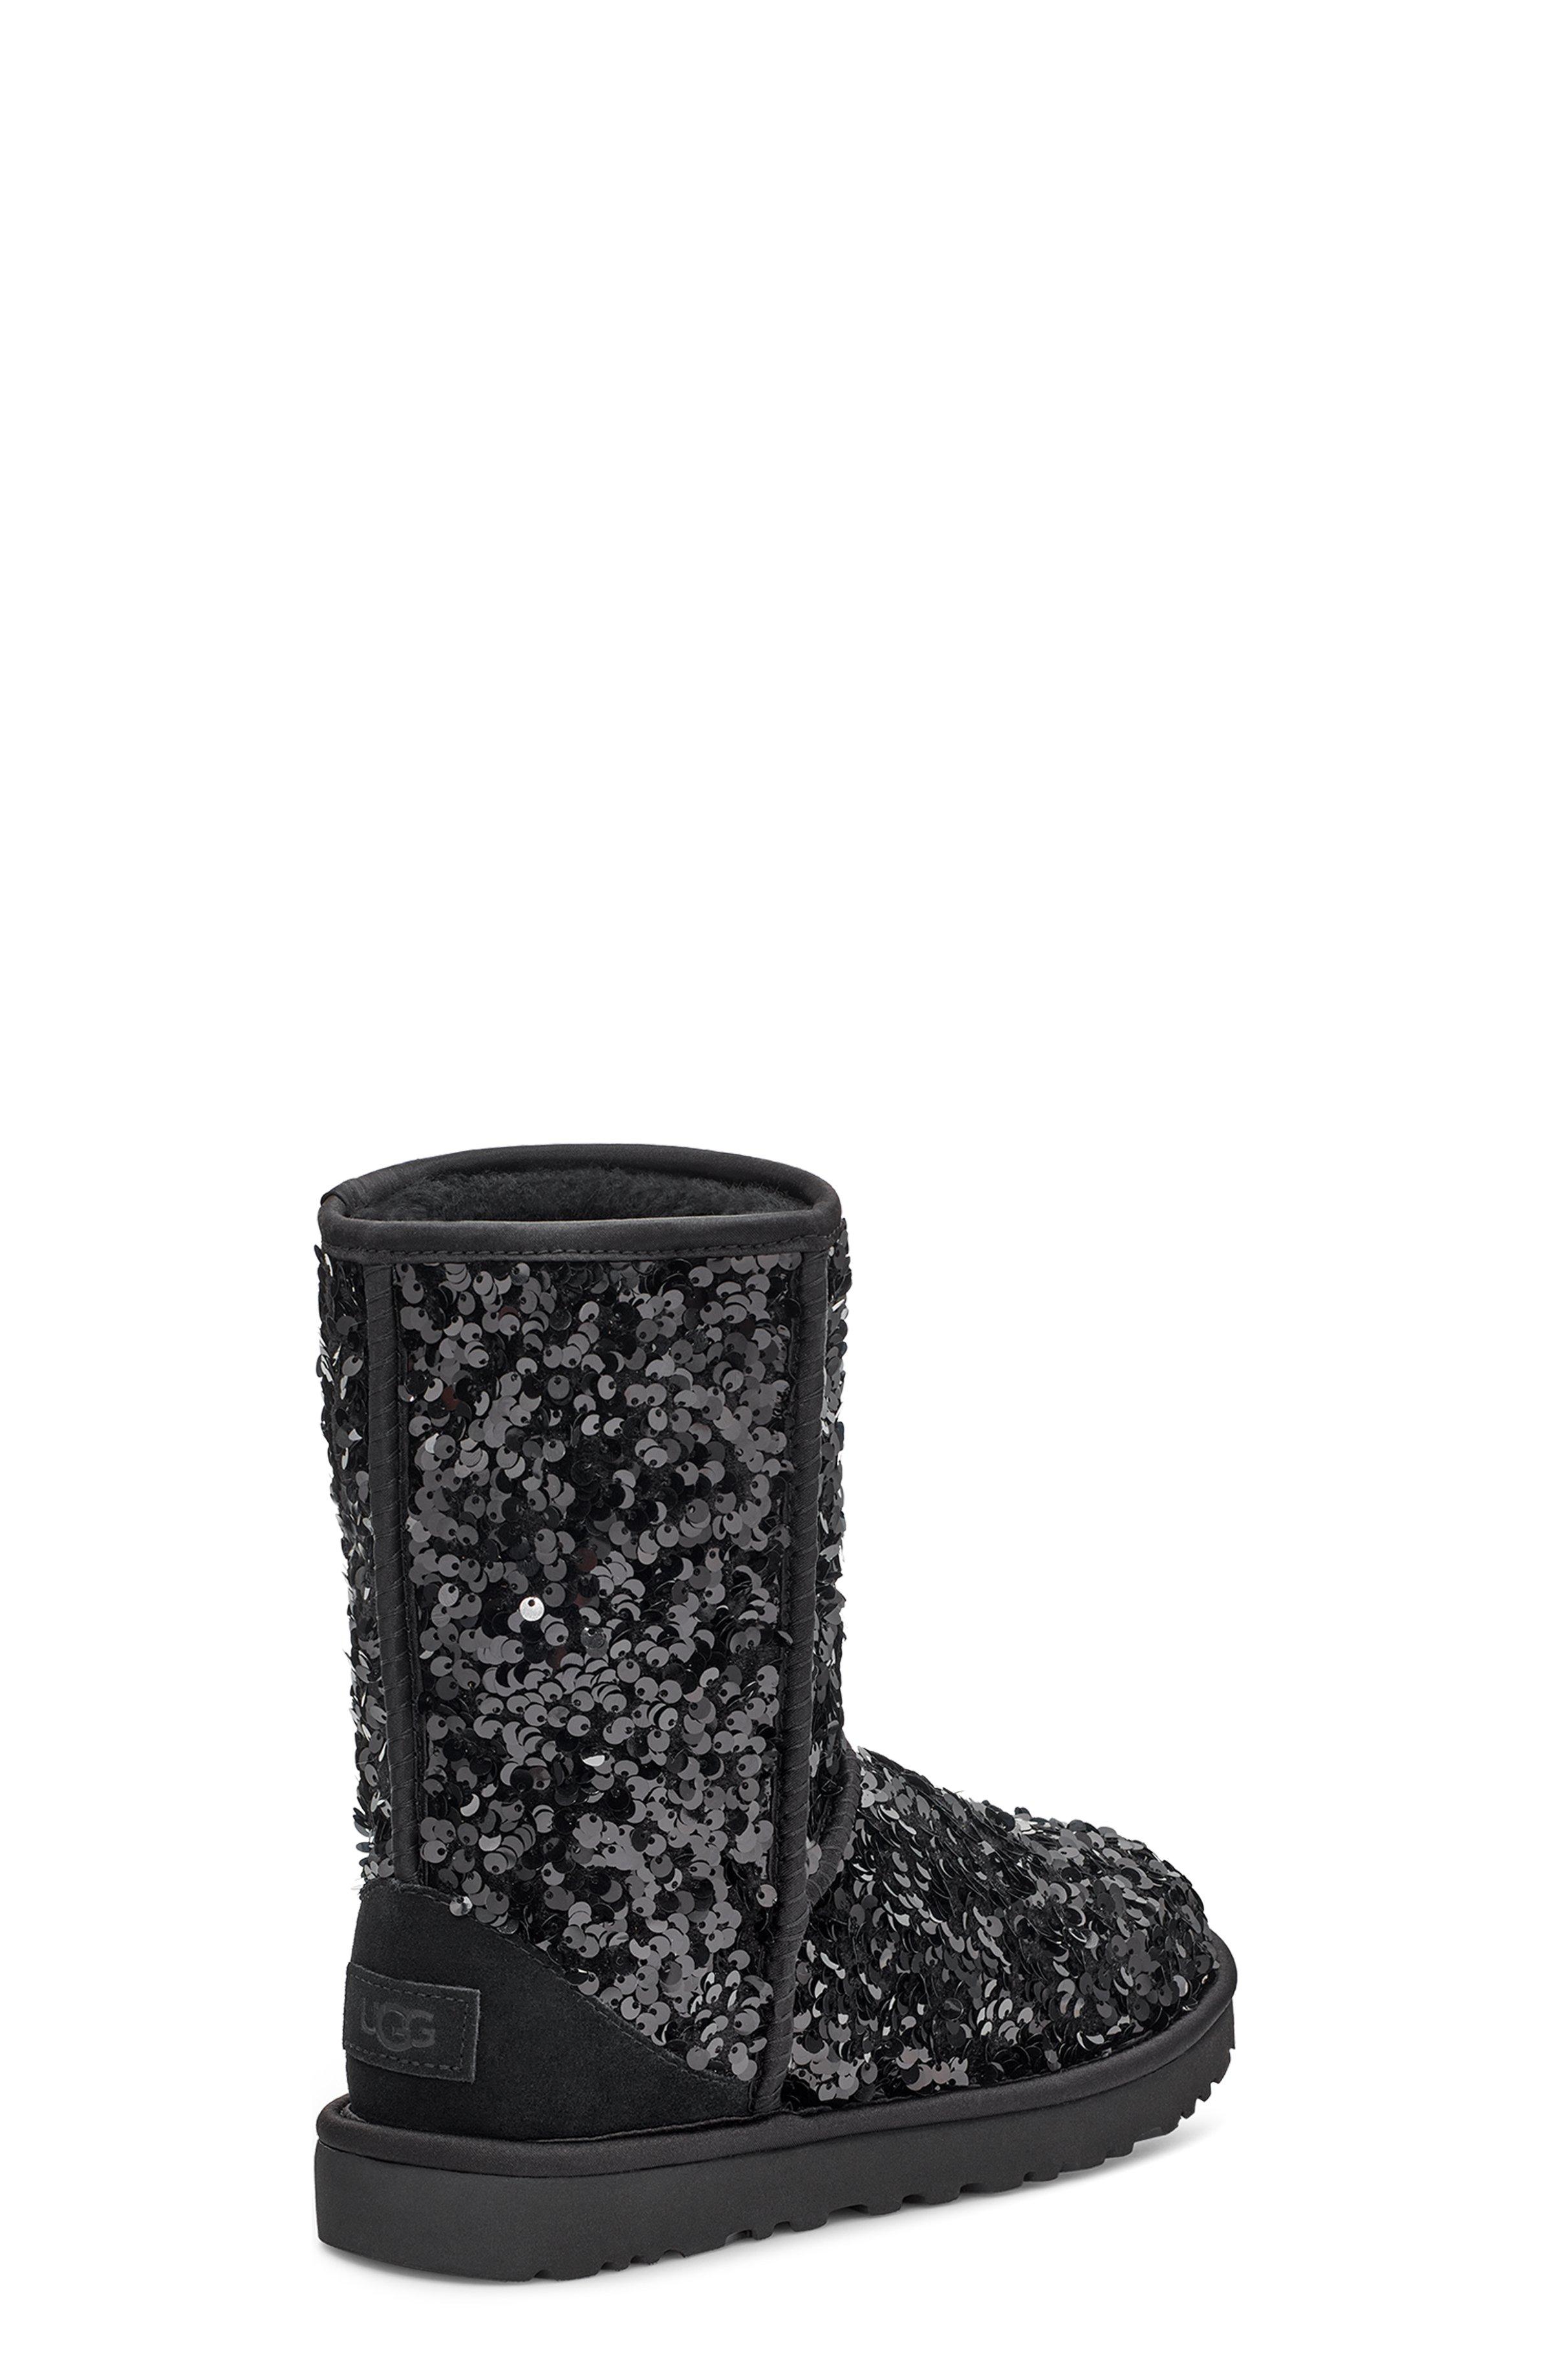 New In Box UGG Classic Short Sequin Boots Black Size 7M